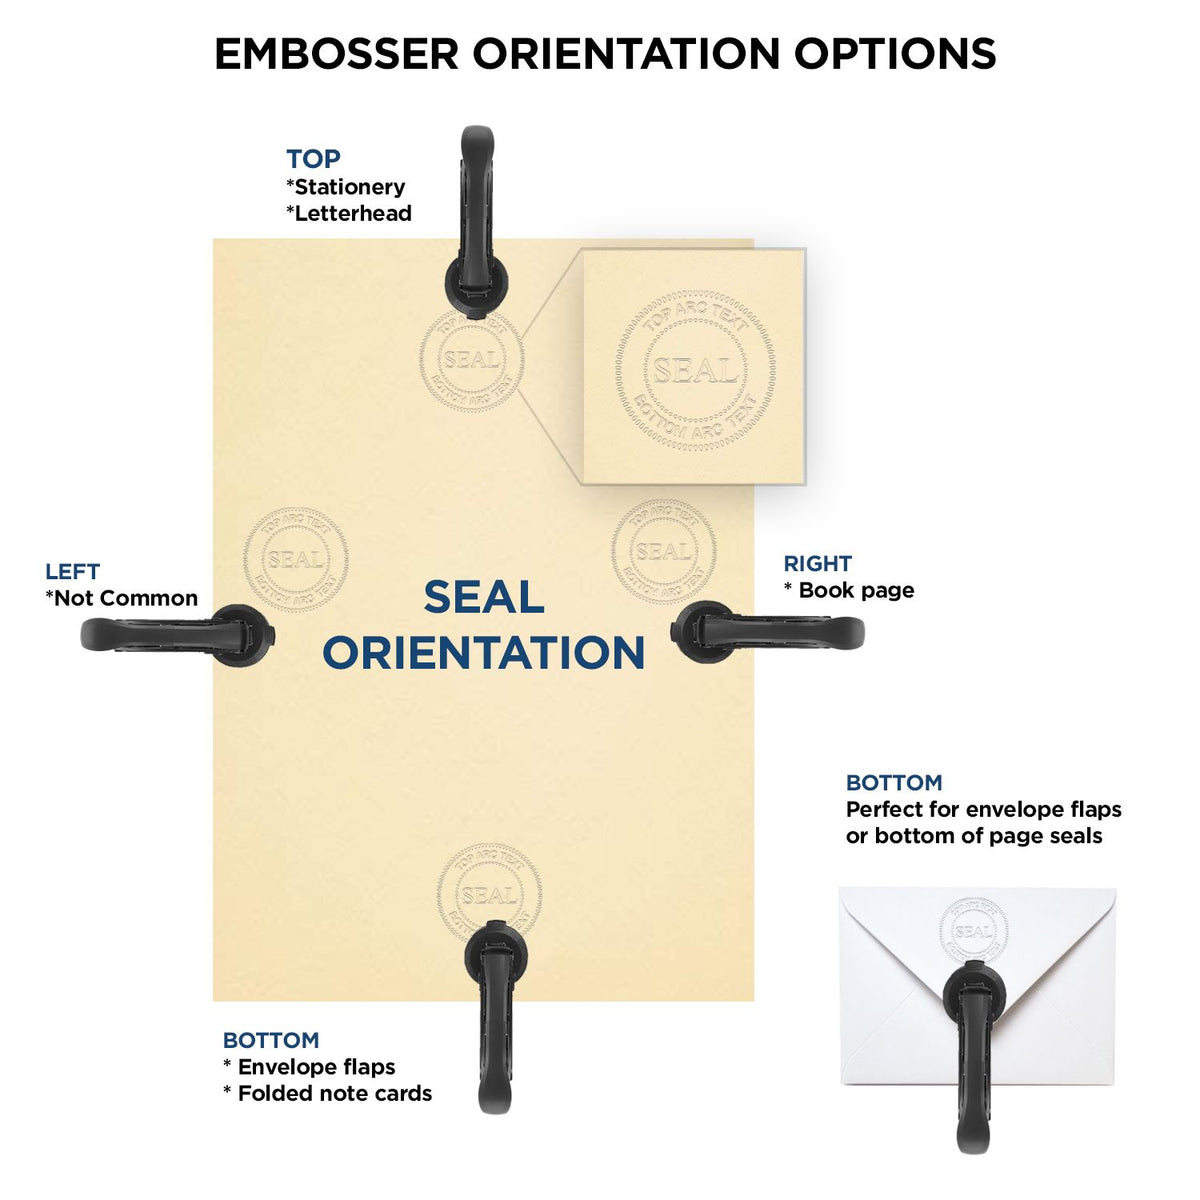 An infographic for the Heavy Duty Cast Iron Washington Architect Embosser showing embosser orientation, this is showing examples of a top, bottom, right and left insert.